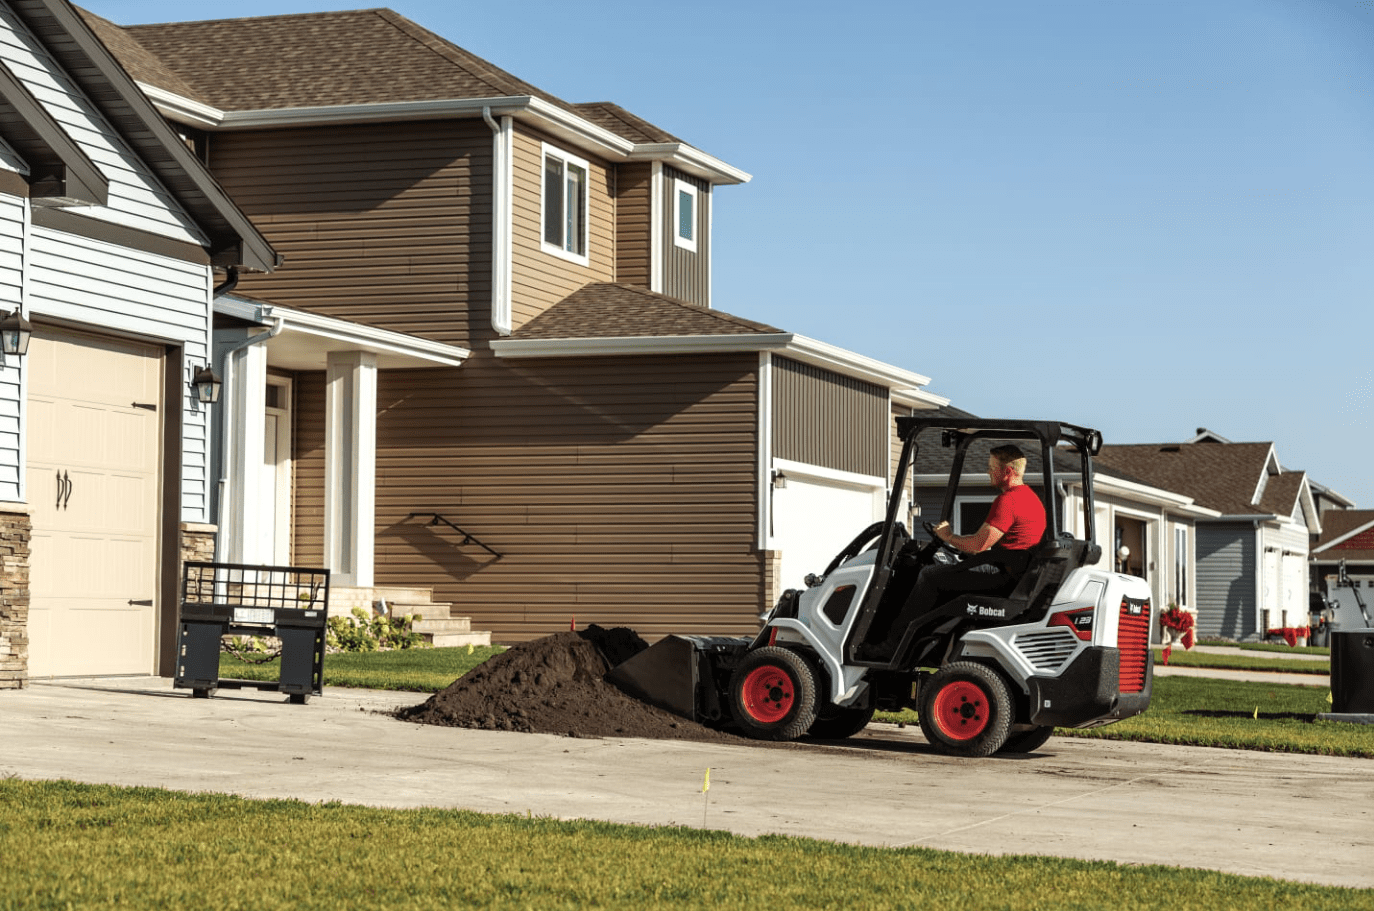 Browse Specs and more for the L23 Small Articulated Loader - Bobcat of the Rockies